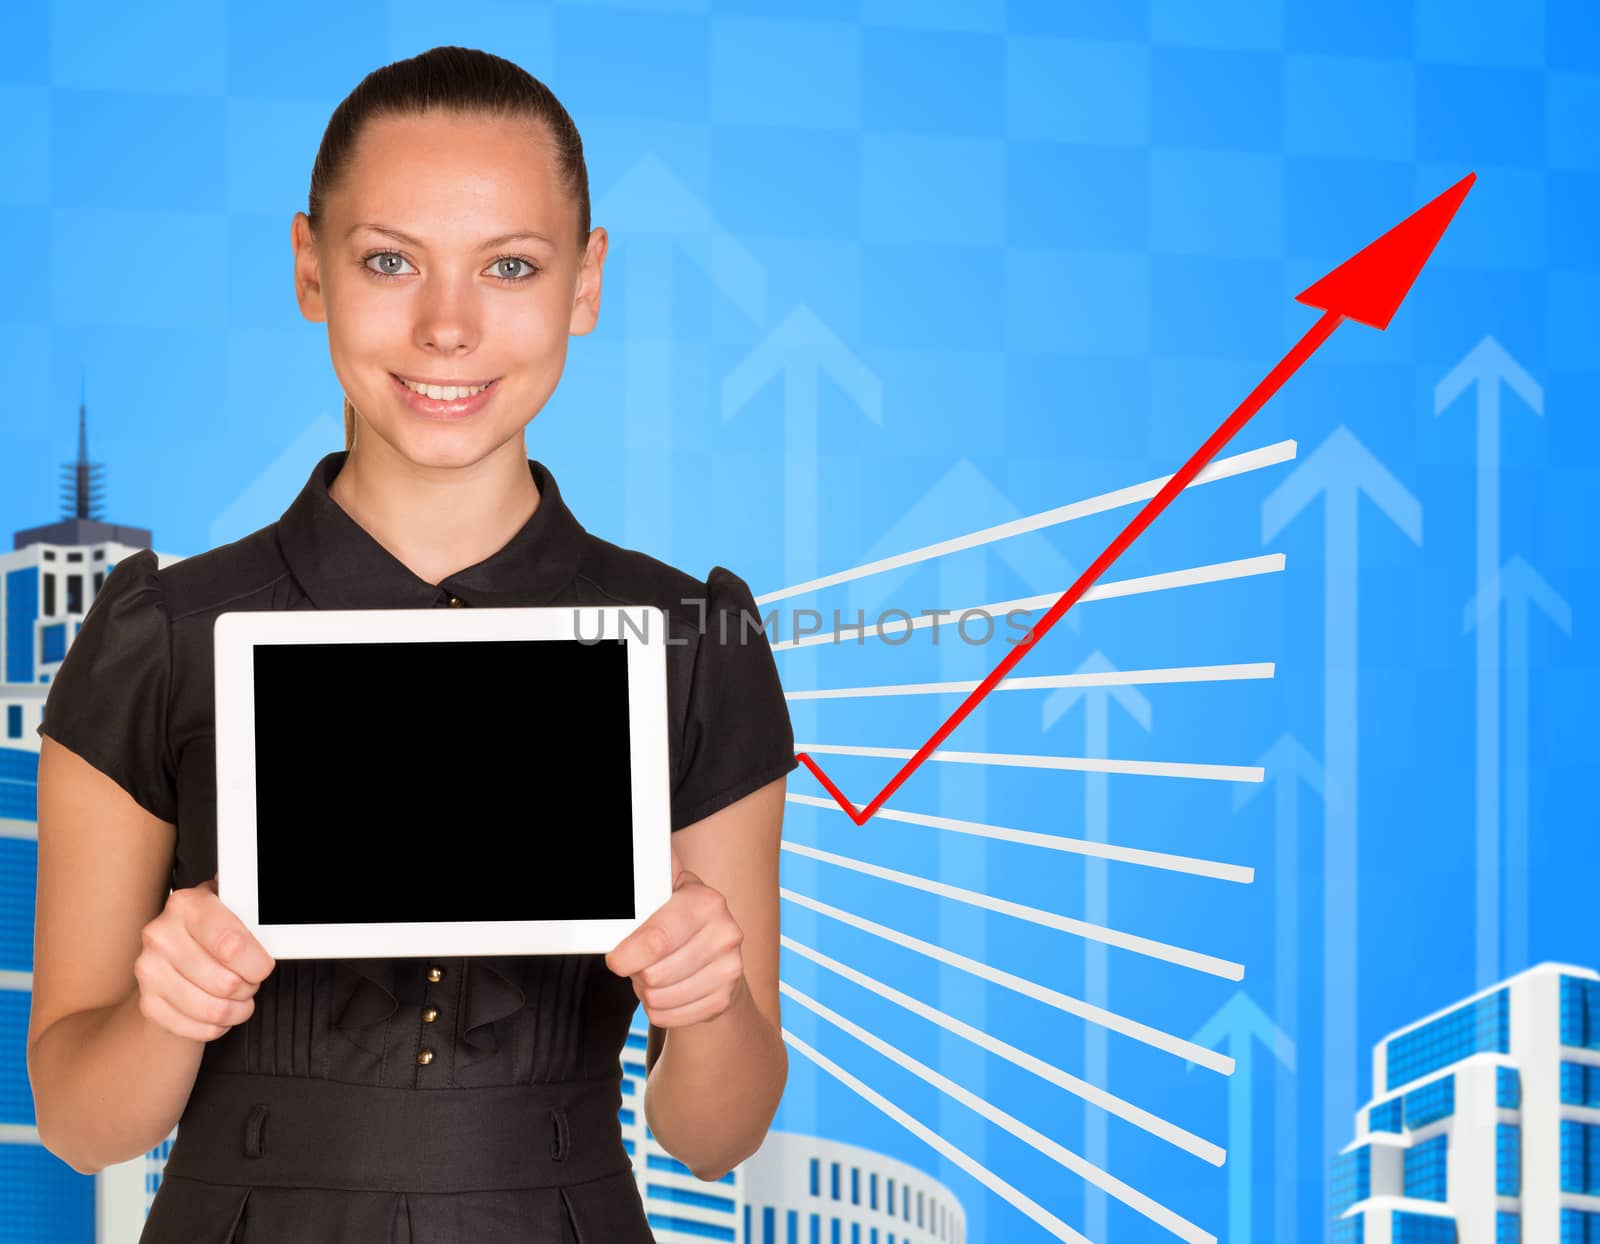 Smiling young woman holding tablet and looking at camera on abstract blue background with red arrow